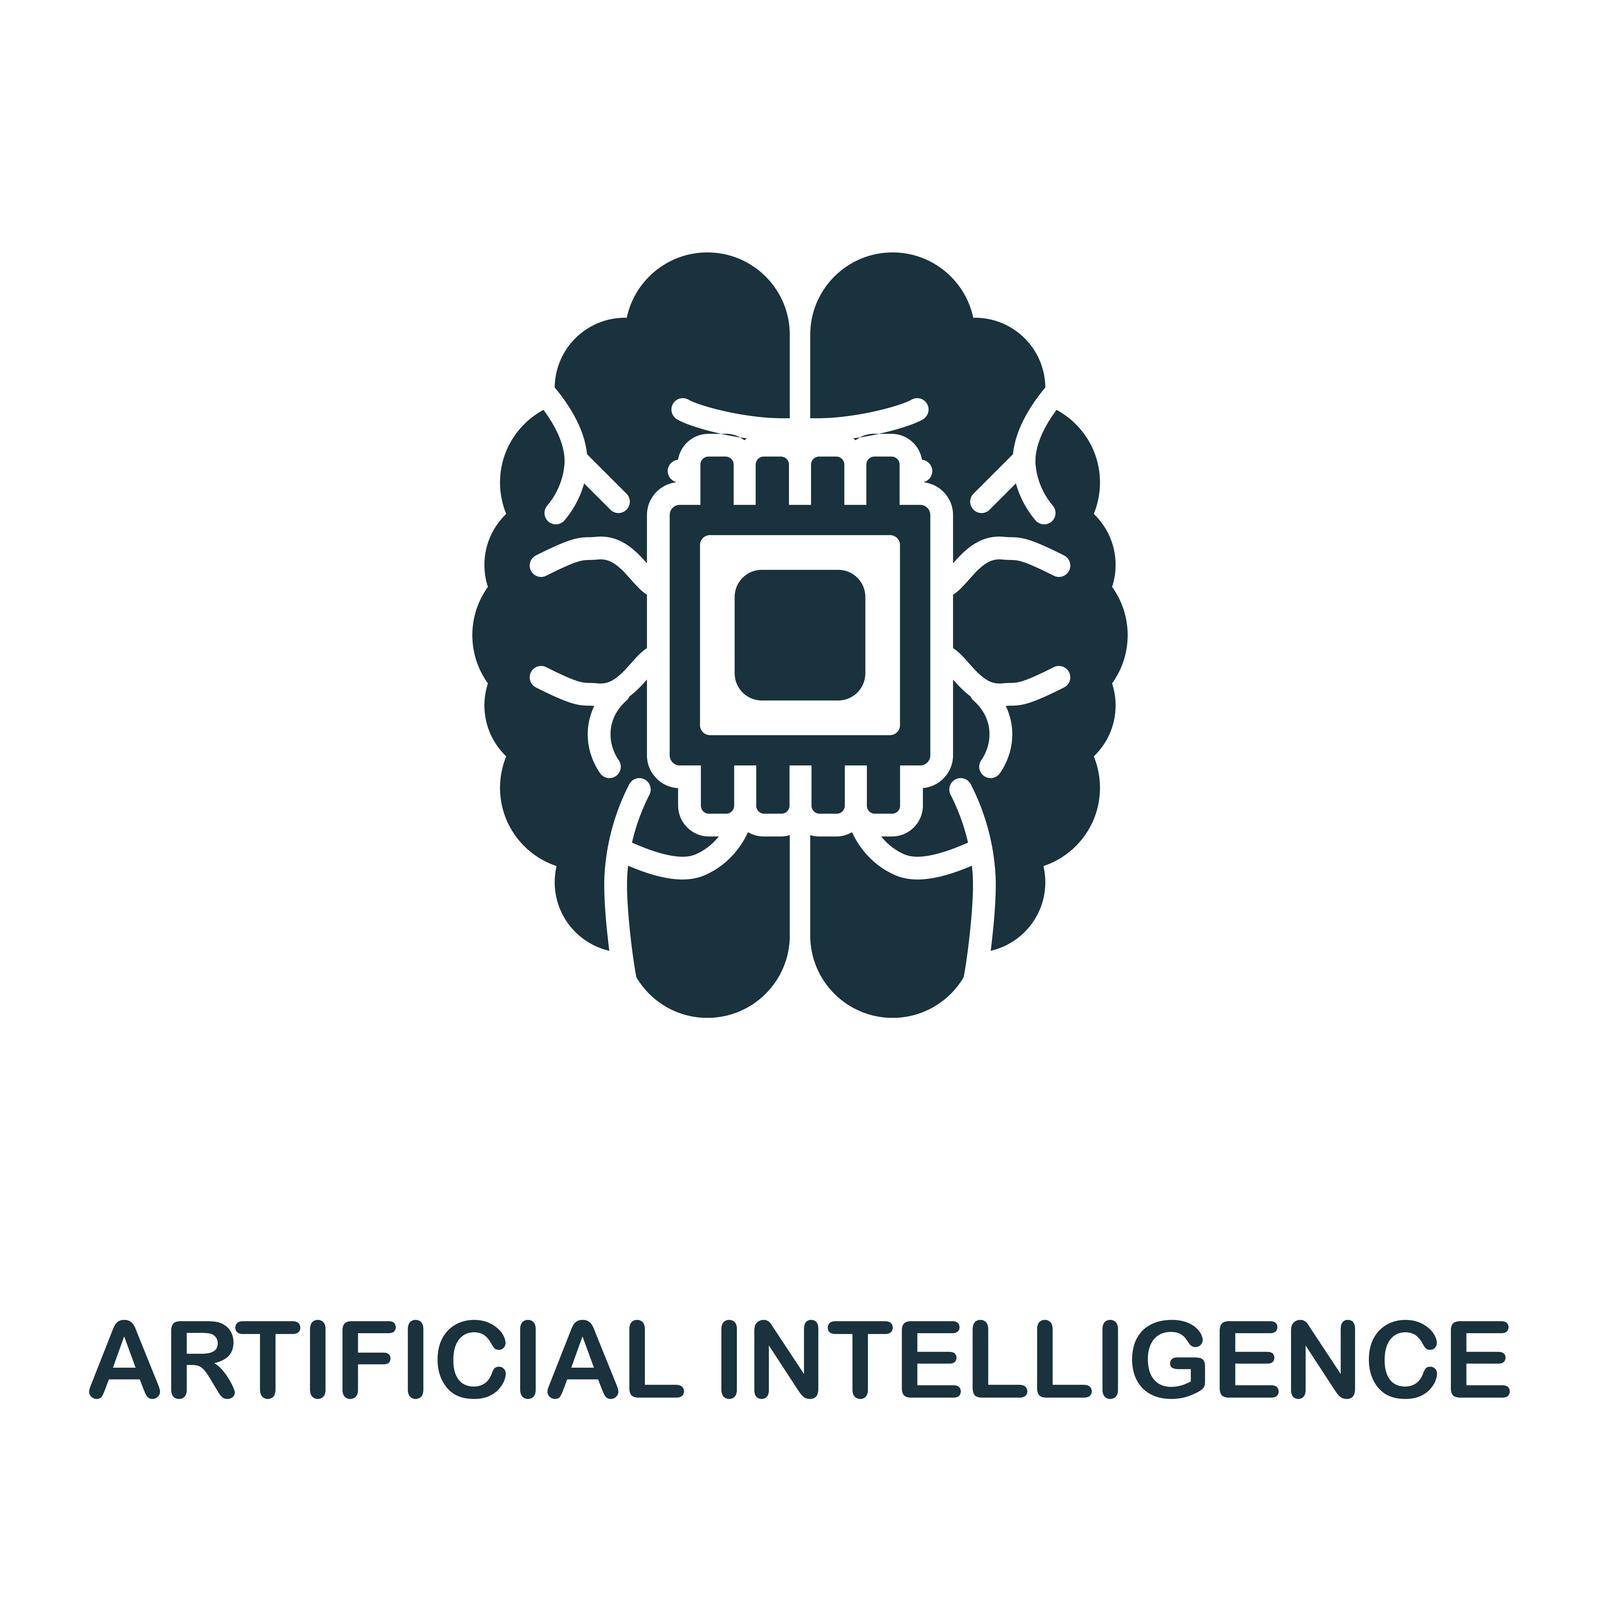 Artificial Intelligence icon. Simple line element artificial intelligence symbol for templates, web design and infographics.